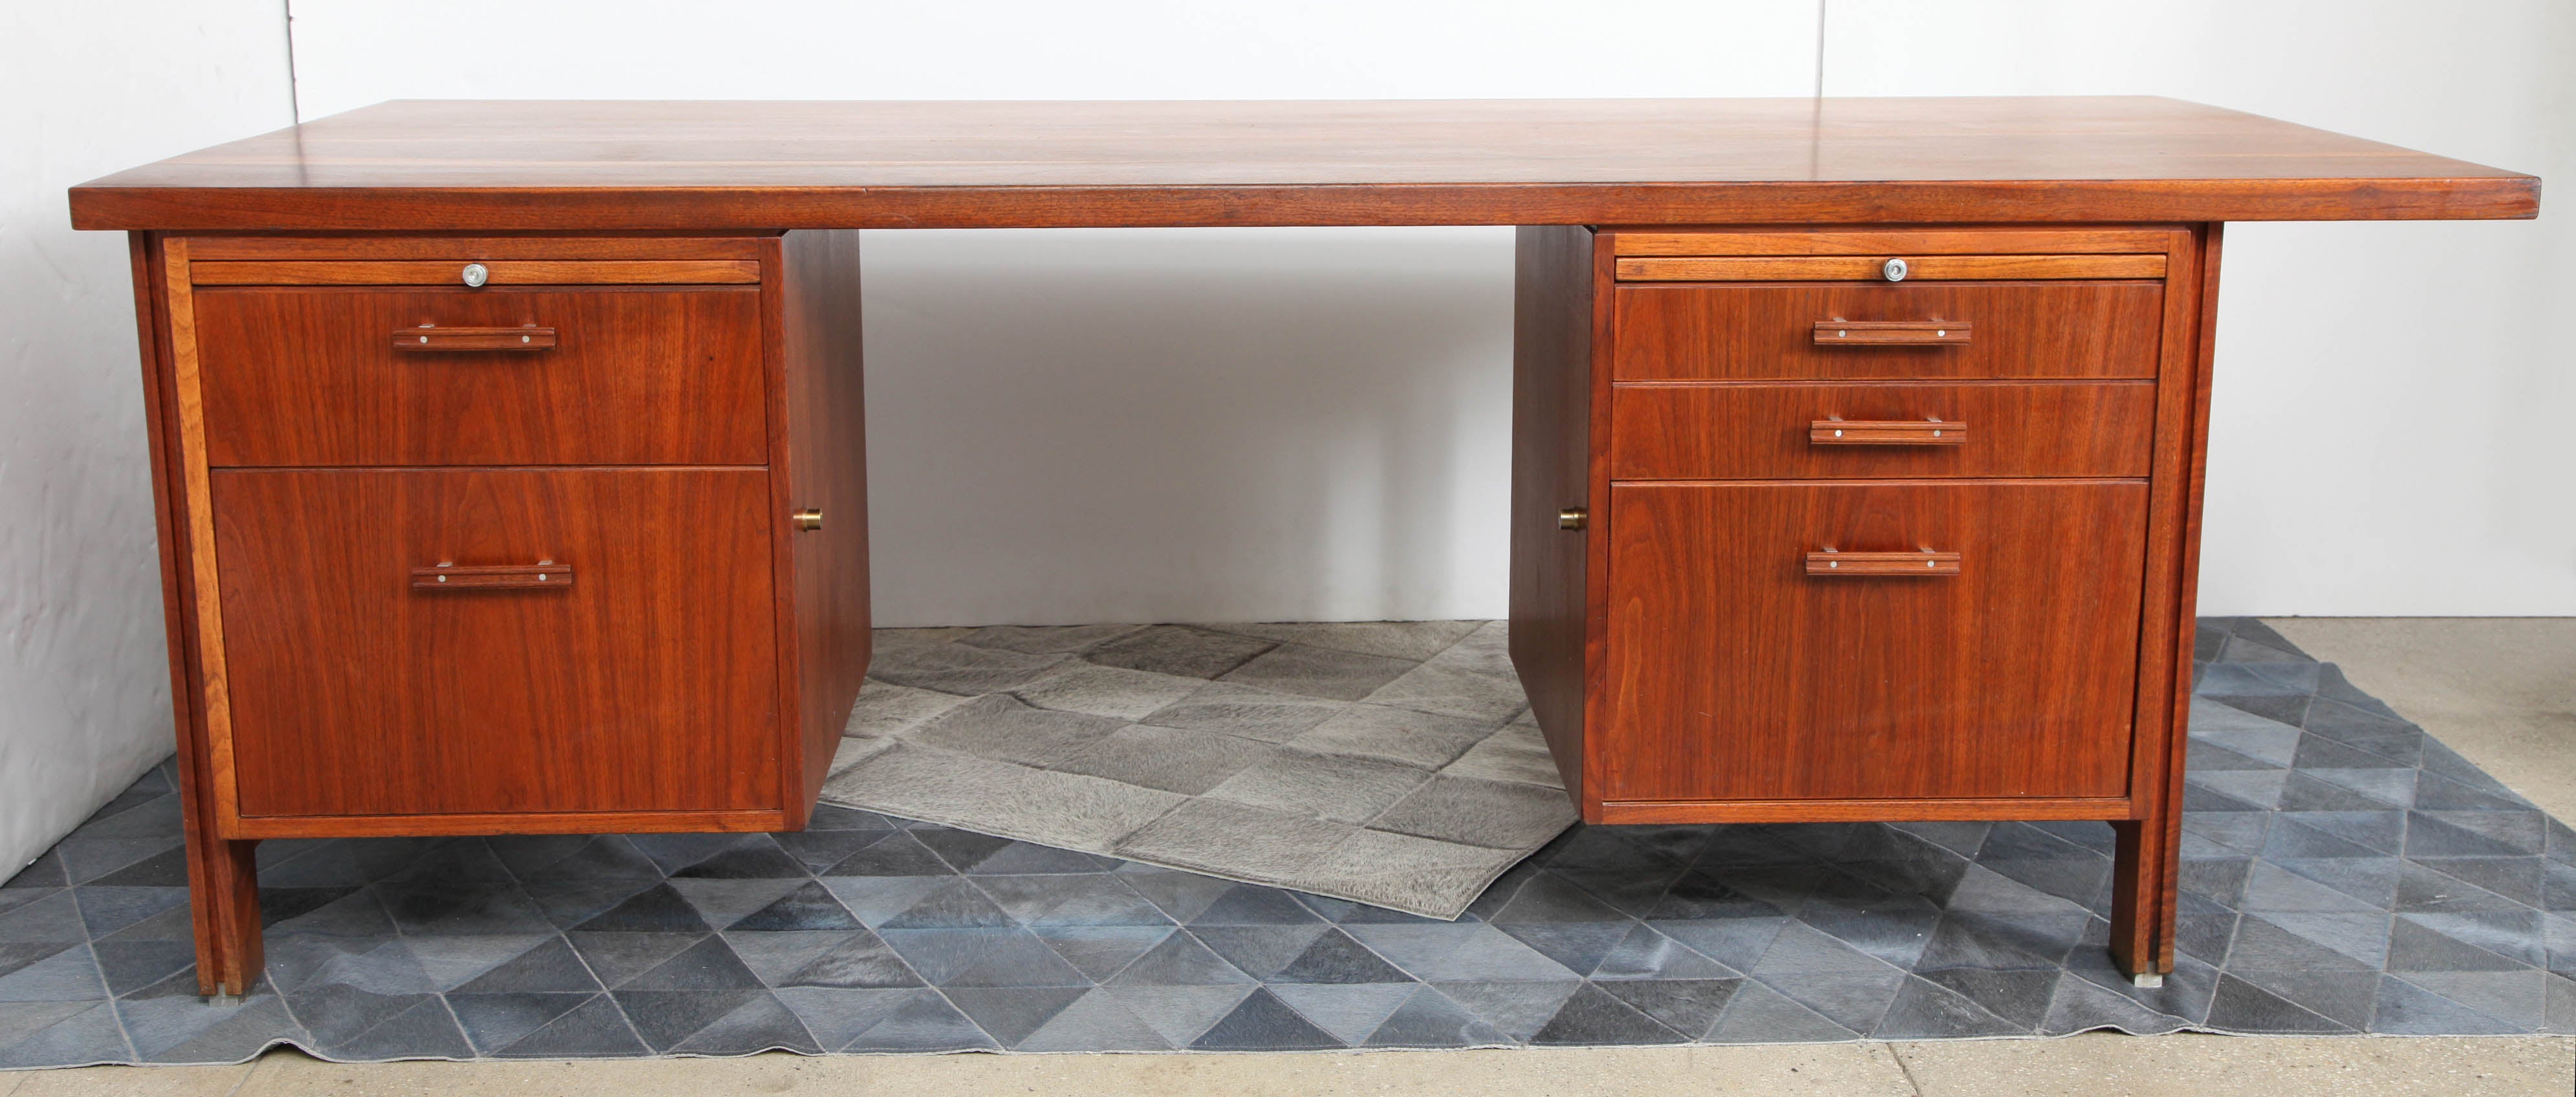 Robert Donovan walnut executive desk was commissioned by the wife of the president of Liberty Tool & Die Corporation of Rochester, NY and custom made for her husband. This was just one of the pieces that Tage Frid placed in the renovation of their